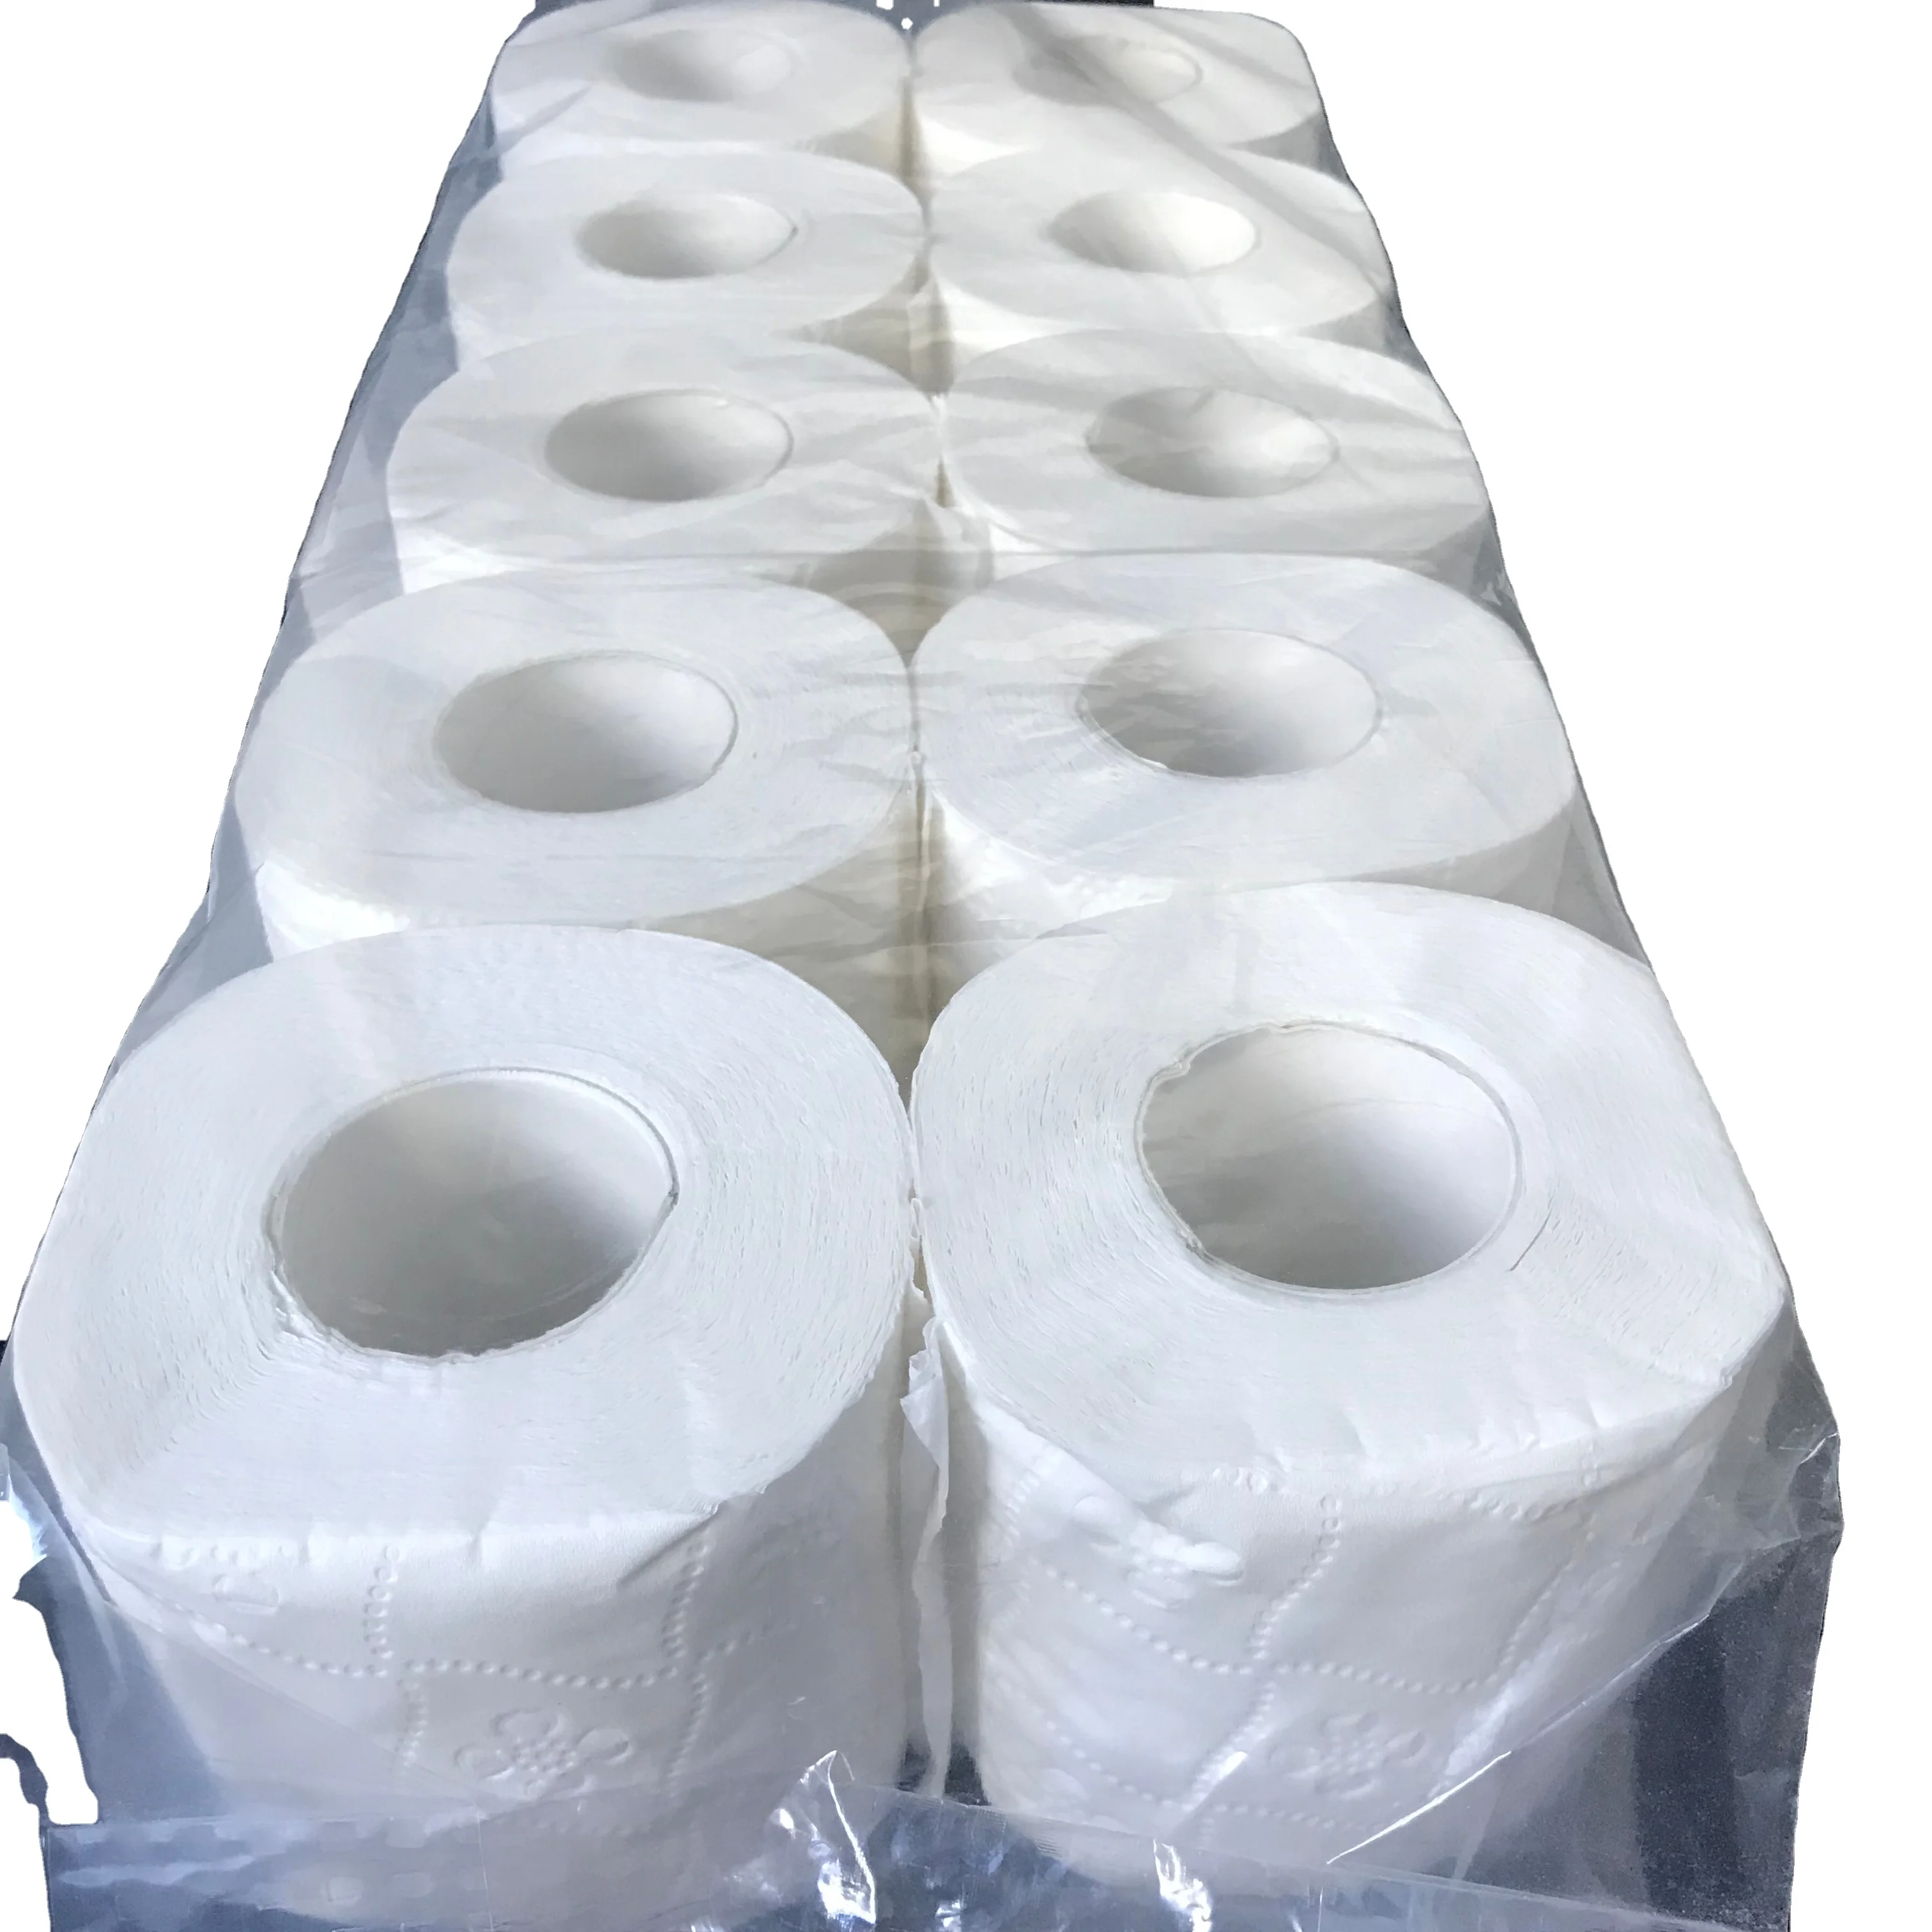 

China low price 100% virgin wood pulp 3ply toilet paper rolls tissue soft fsc, White